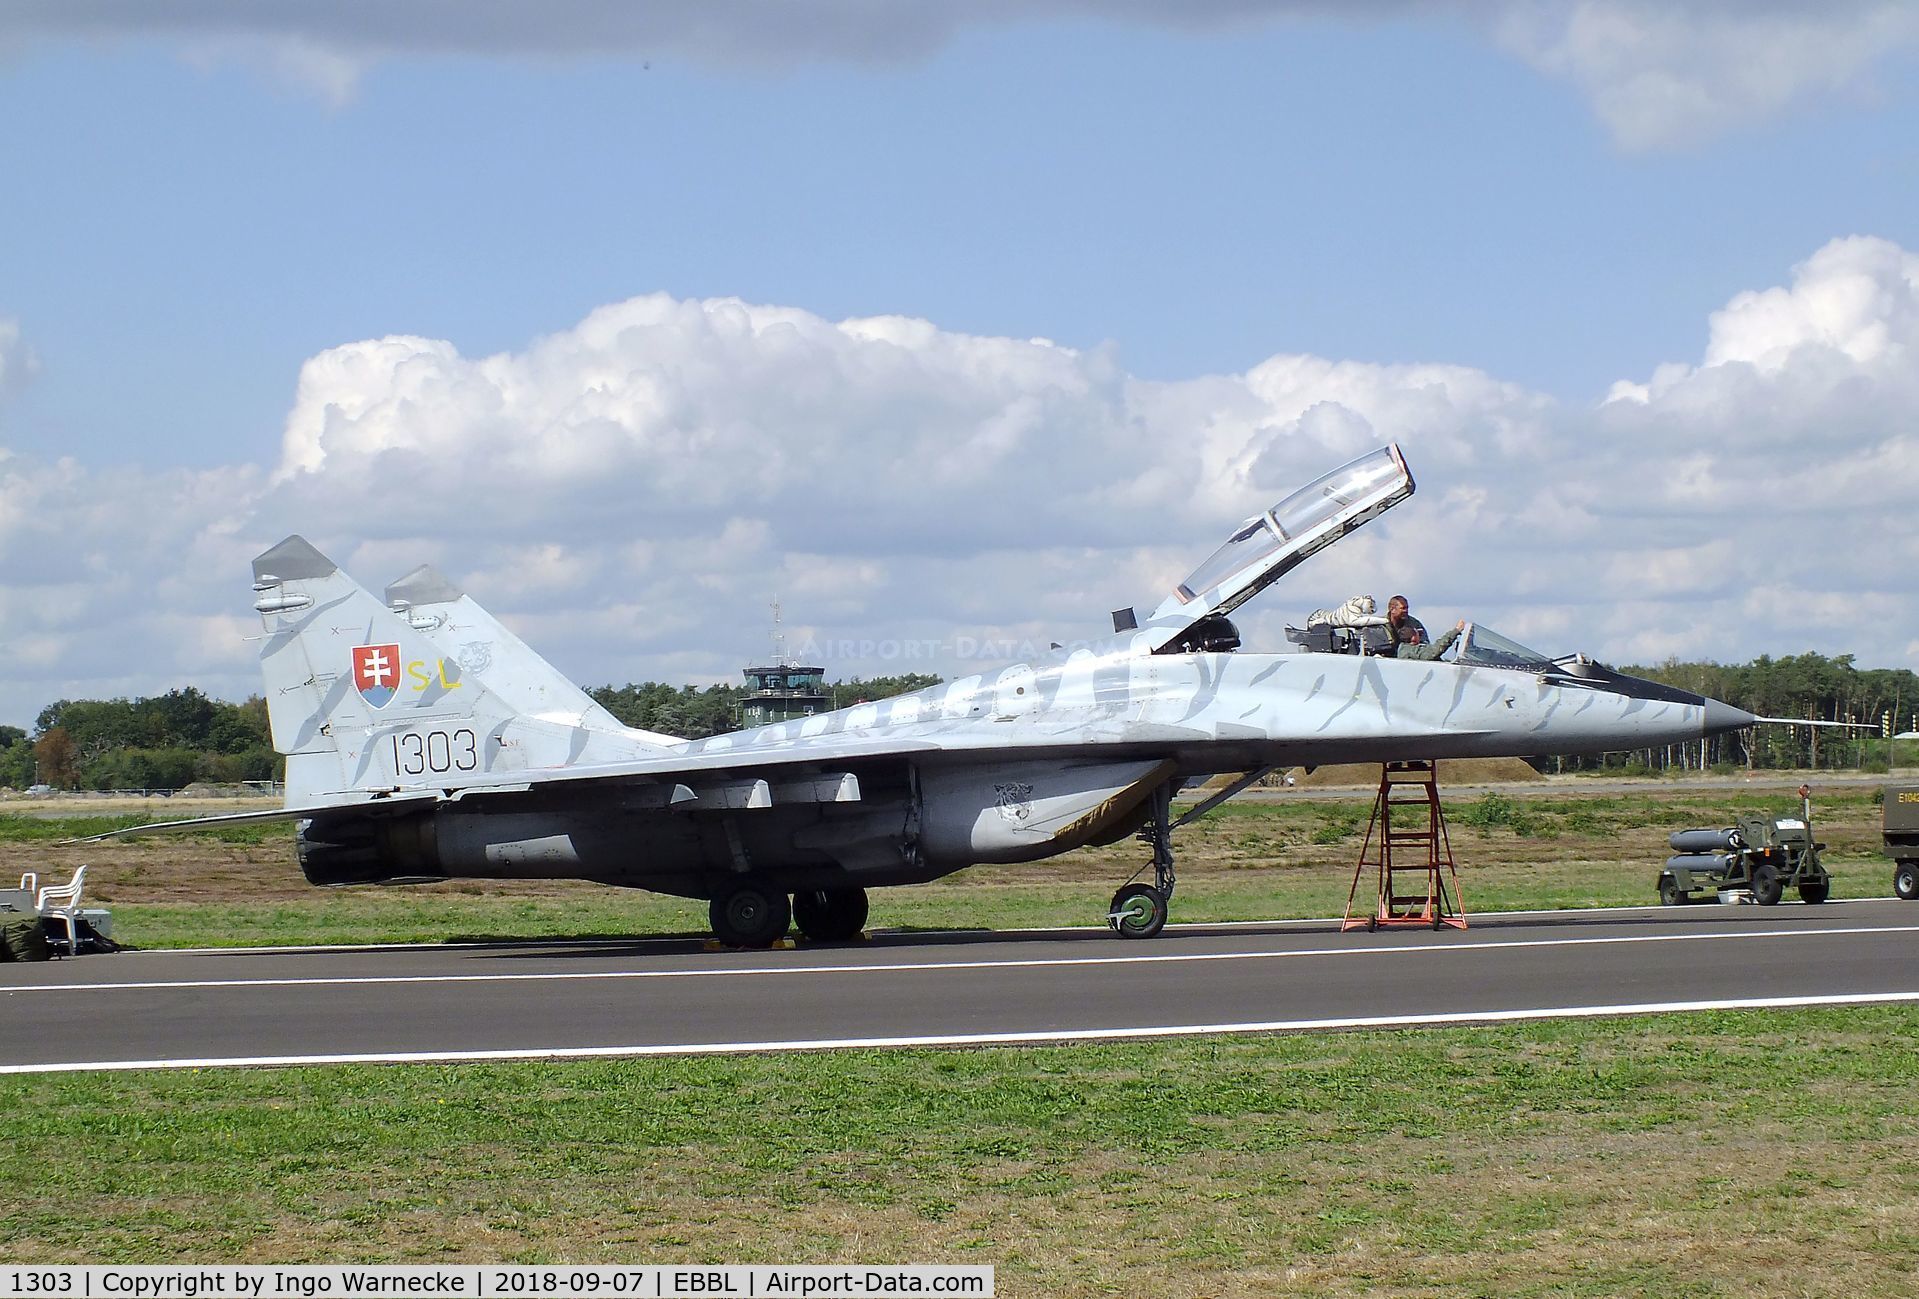 1303, Mikoyan-Gurevich MiG-29UB C/N N50903028113, Mikoyan i Gurevich MiG-29UB FULCRUM-B of the Slovak AF in 'Tiger-Meet' special colours at the 2018 BAFD spotters day, Kleine Brogel airbase